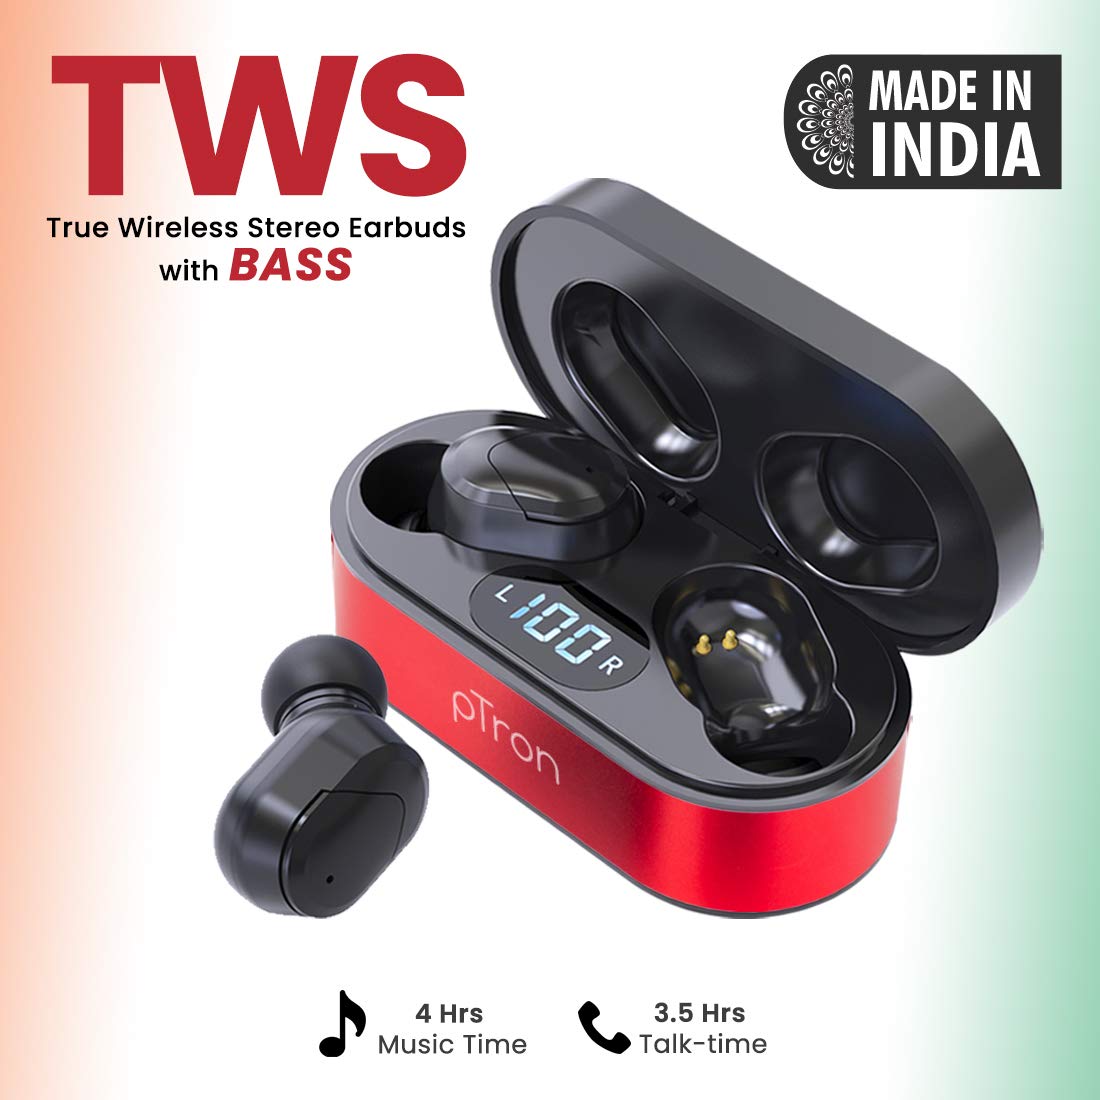 pTron Bassbuds Plus in Ear True Wireless Stereo Earbuds with Mic, Deep Bass Bluetooth Headphones, Voice Assistance, IPX4 Sweat & Water Resistant TWS, 12Hrs Battery & Fast Charge (Red & Black)